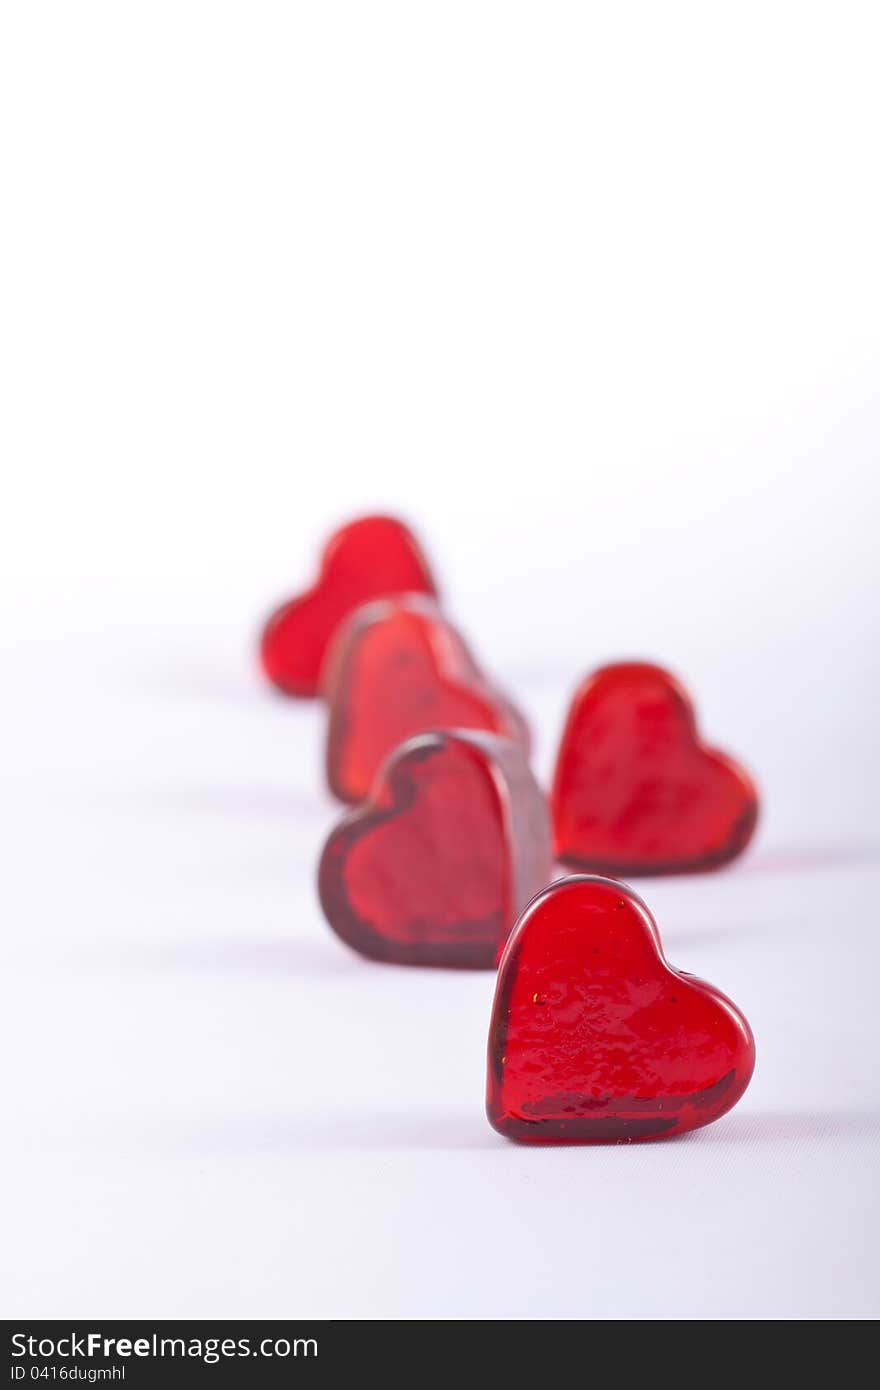 Five Glass hearts in portrait format with shallow depth of field.